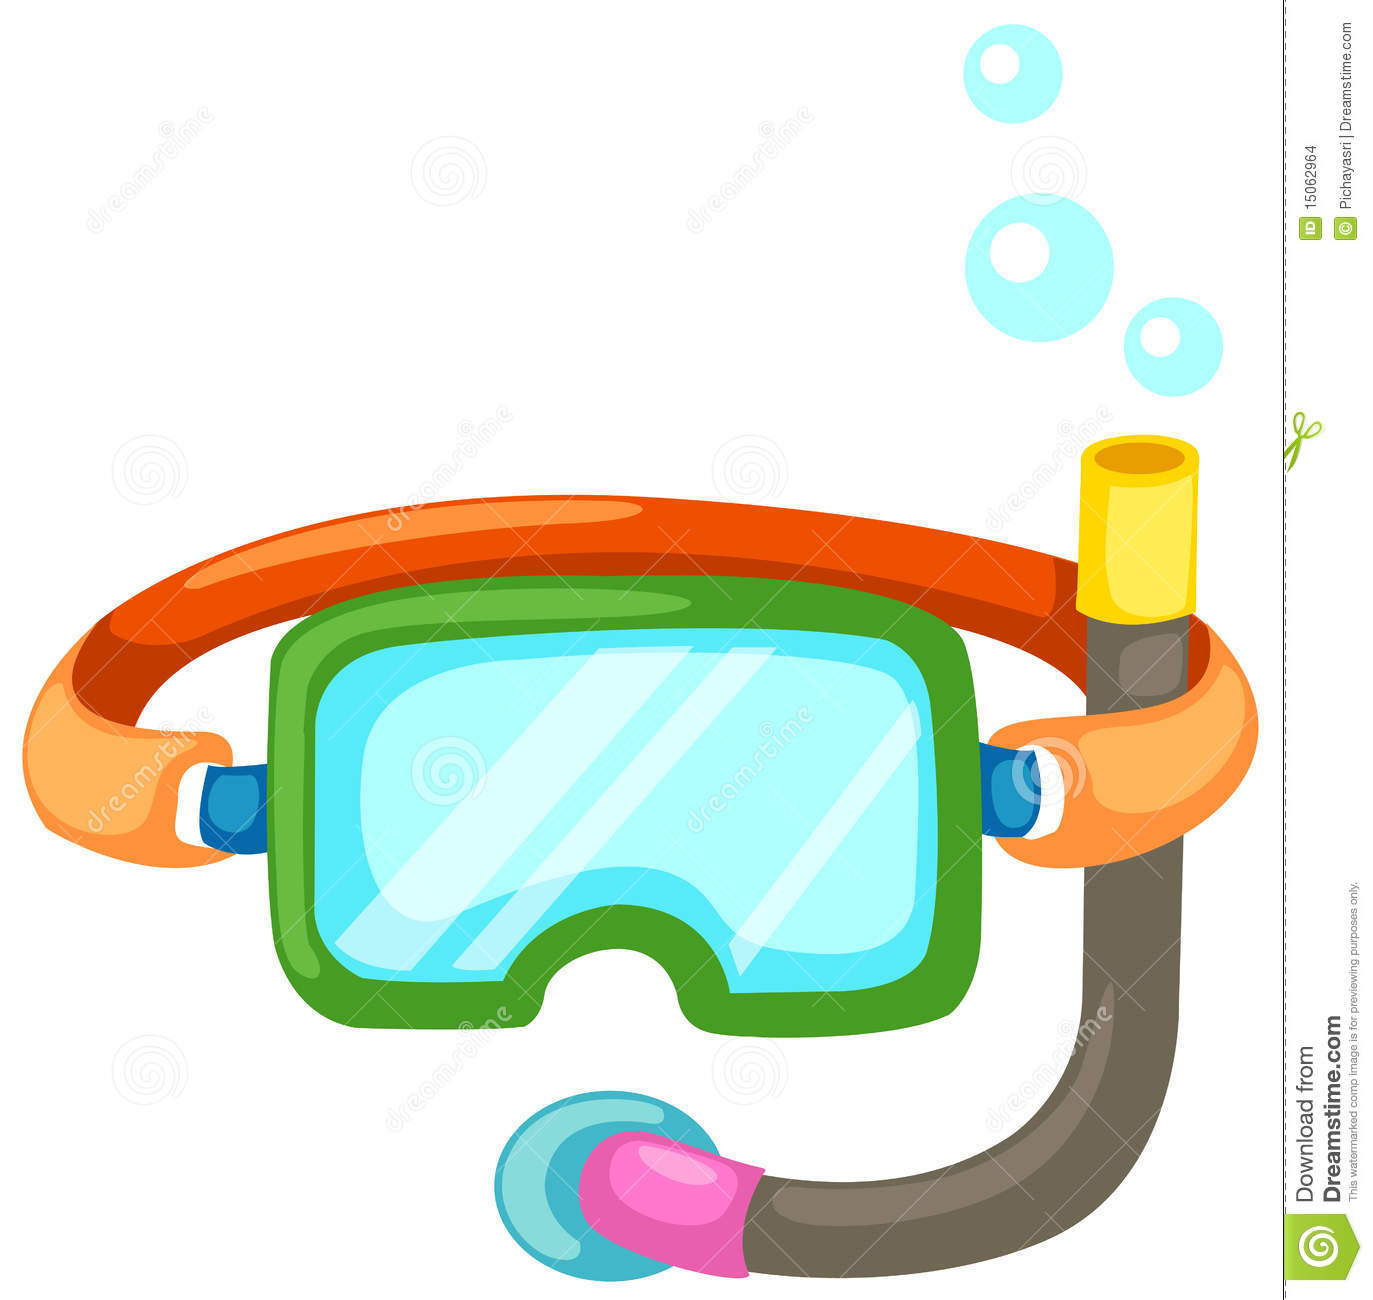 Snorkeling Equipment Stock Images   Image  15062964